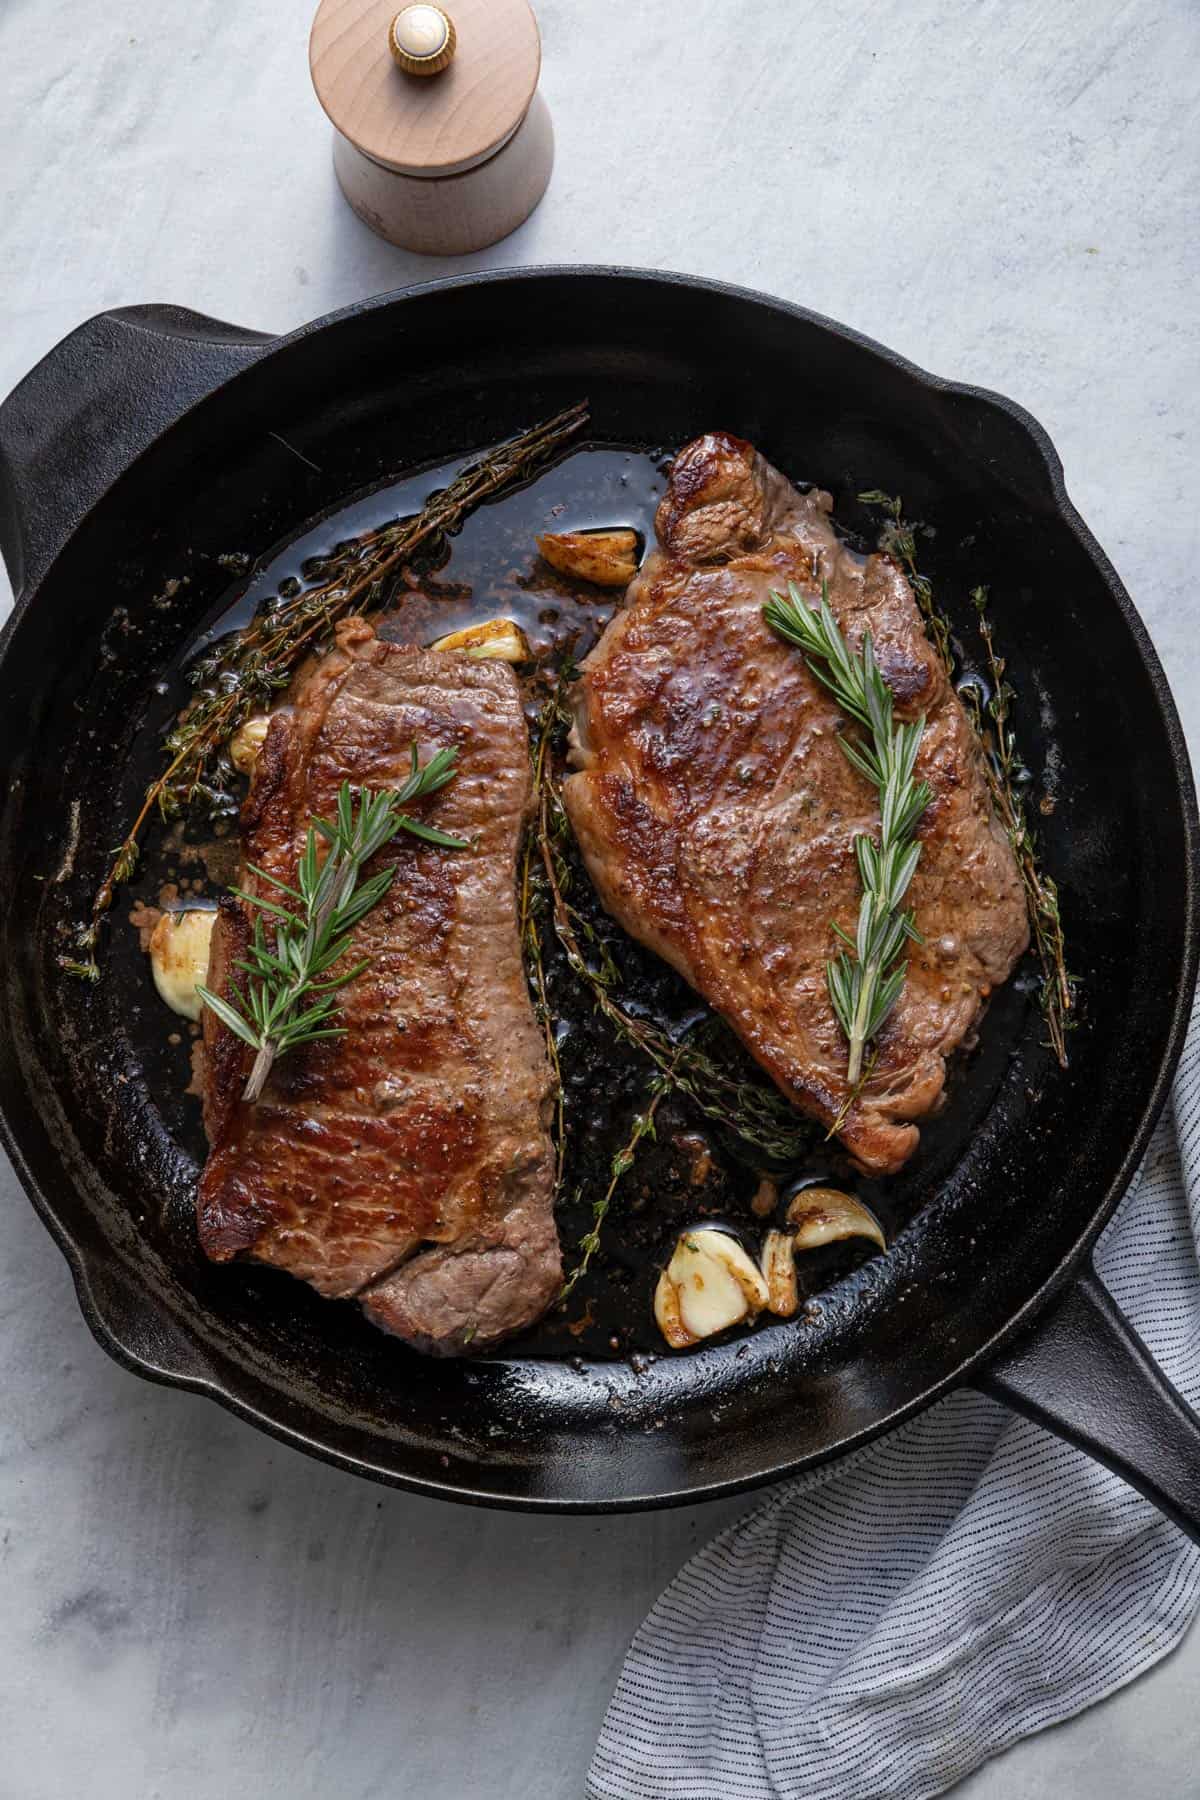 Do You Put Oil in Cast Iron Before Cooking Steak 